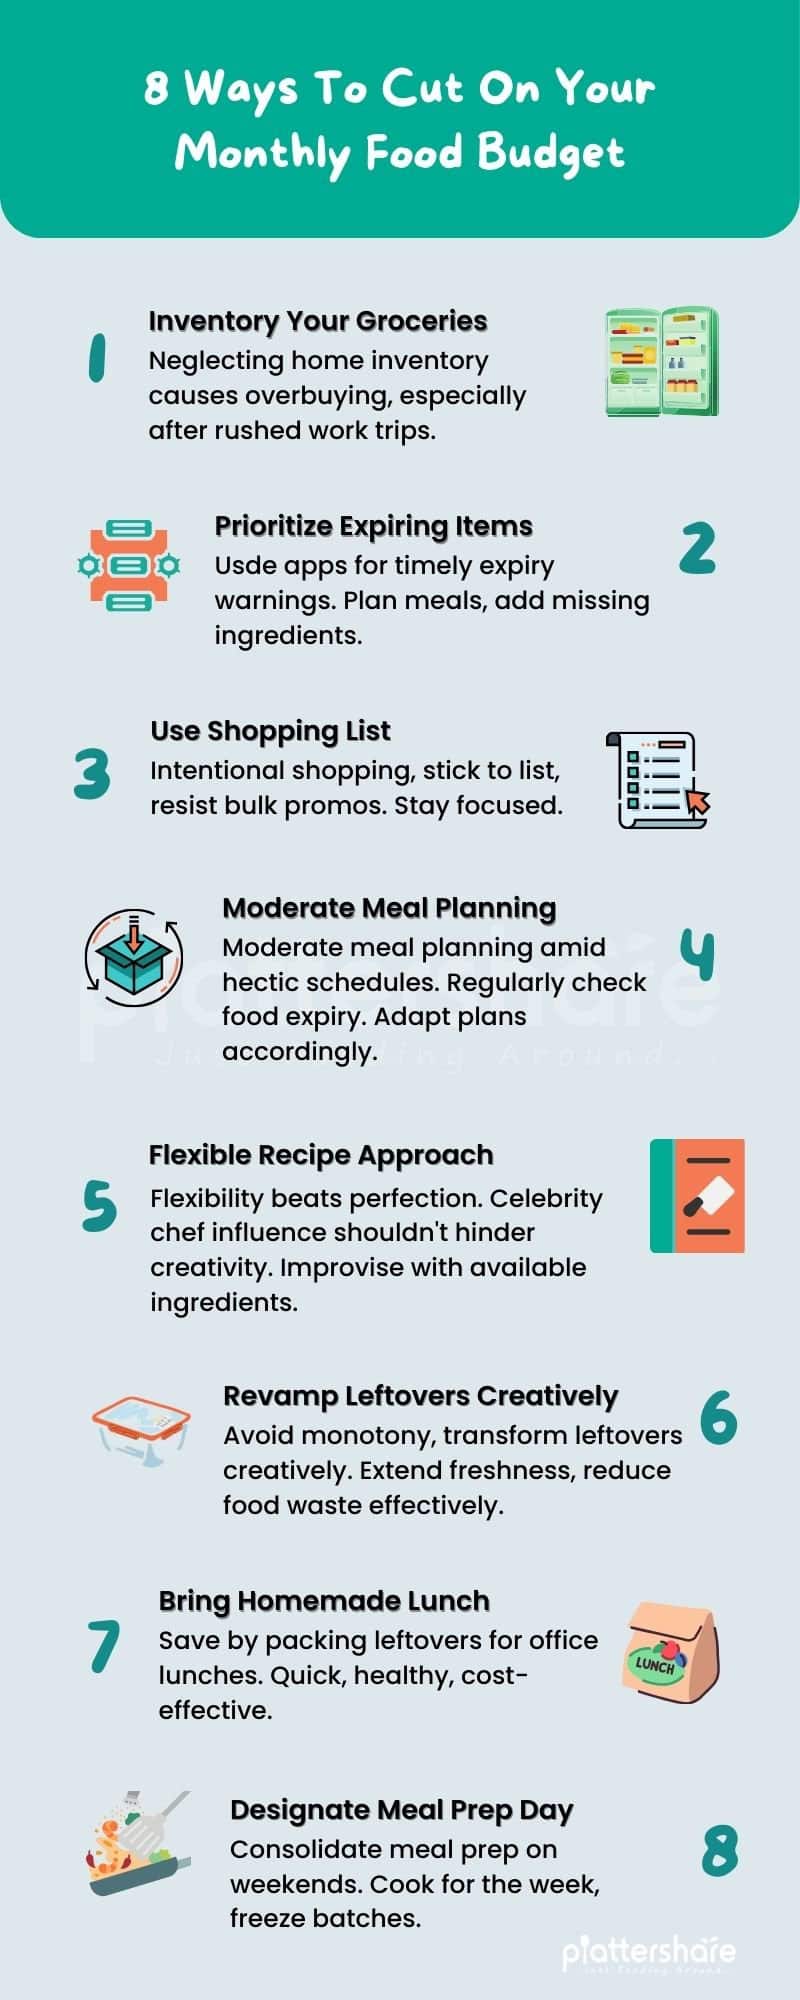 8 Ways To Cut On Your Monthly Food Budget - Infographic